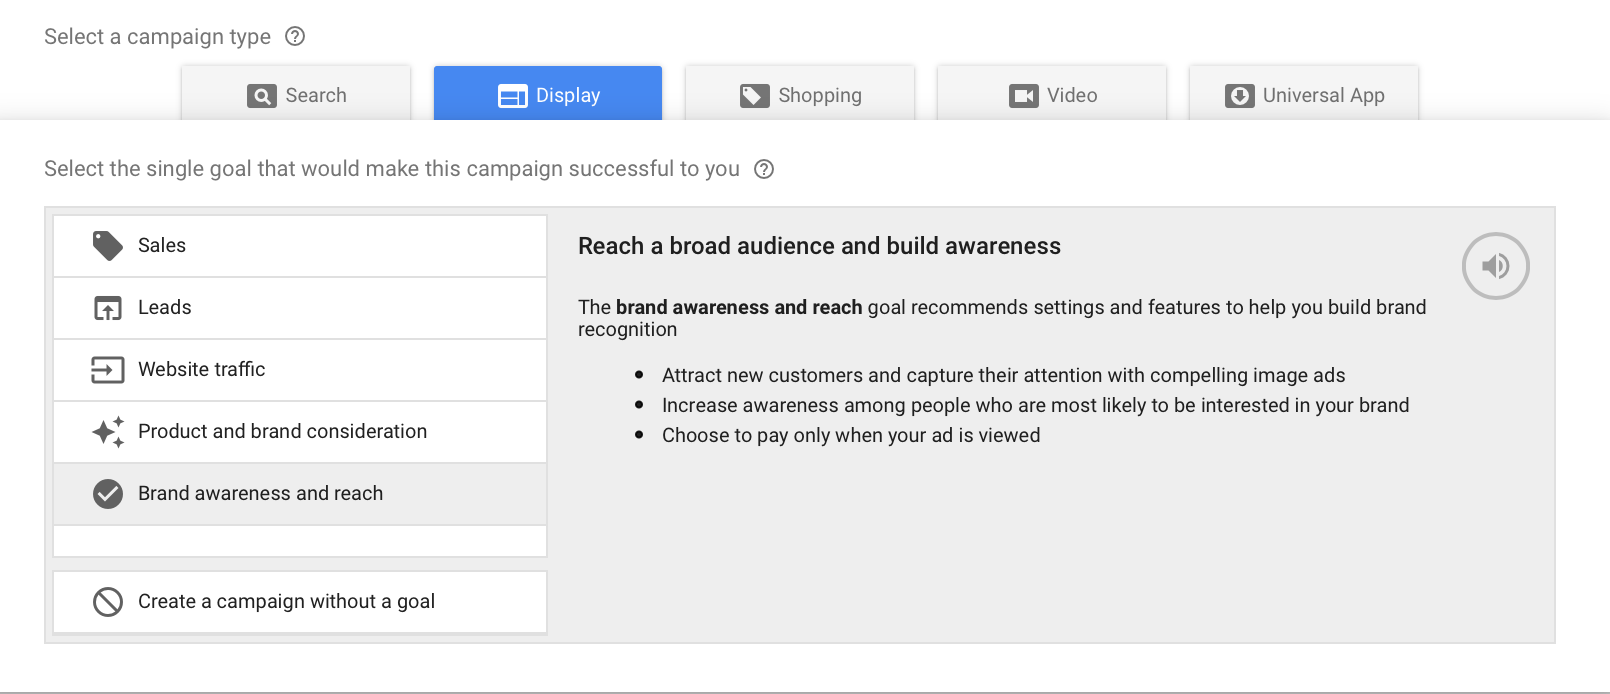 How to Run Video Ad Campaigns with Google Ads